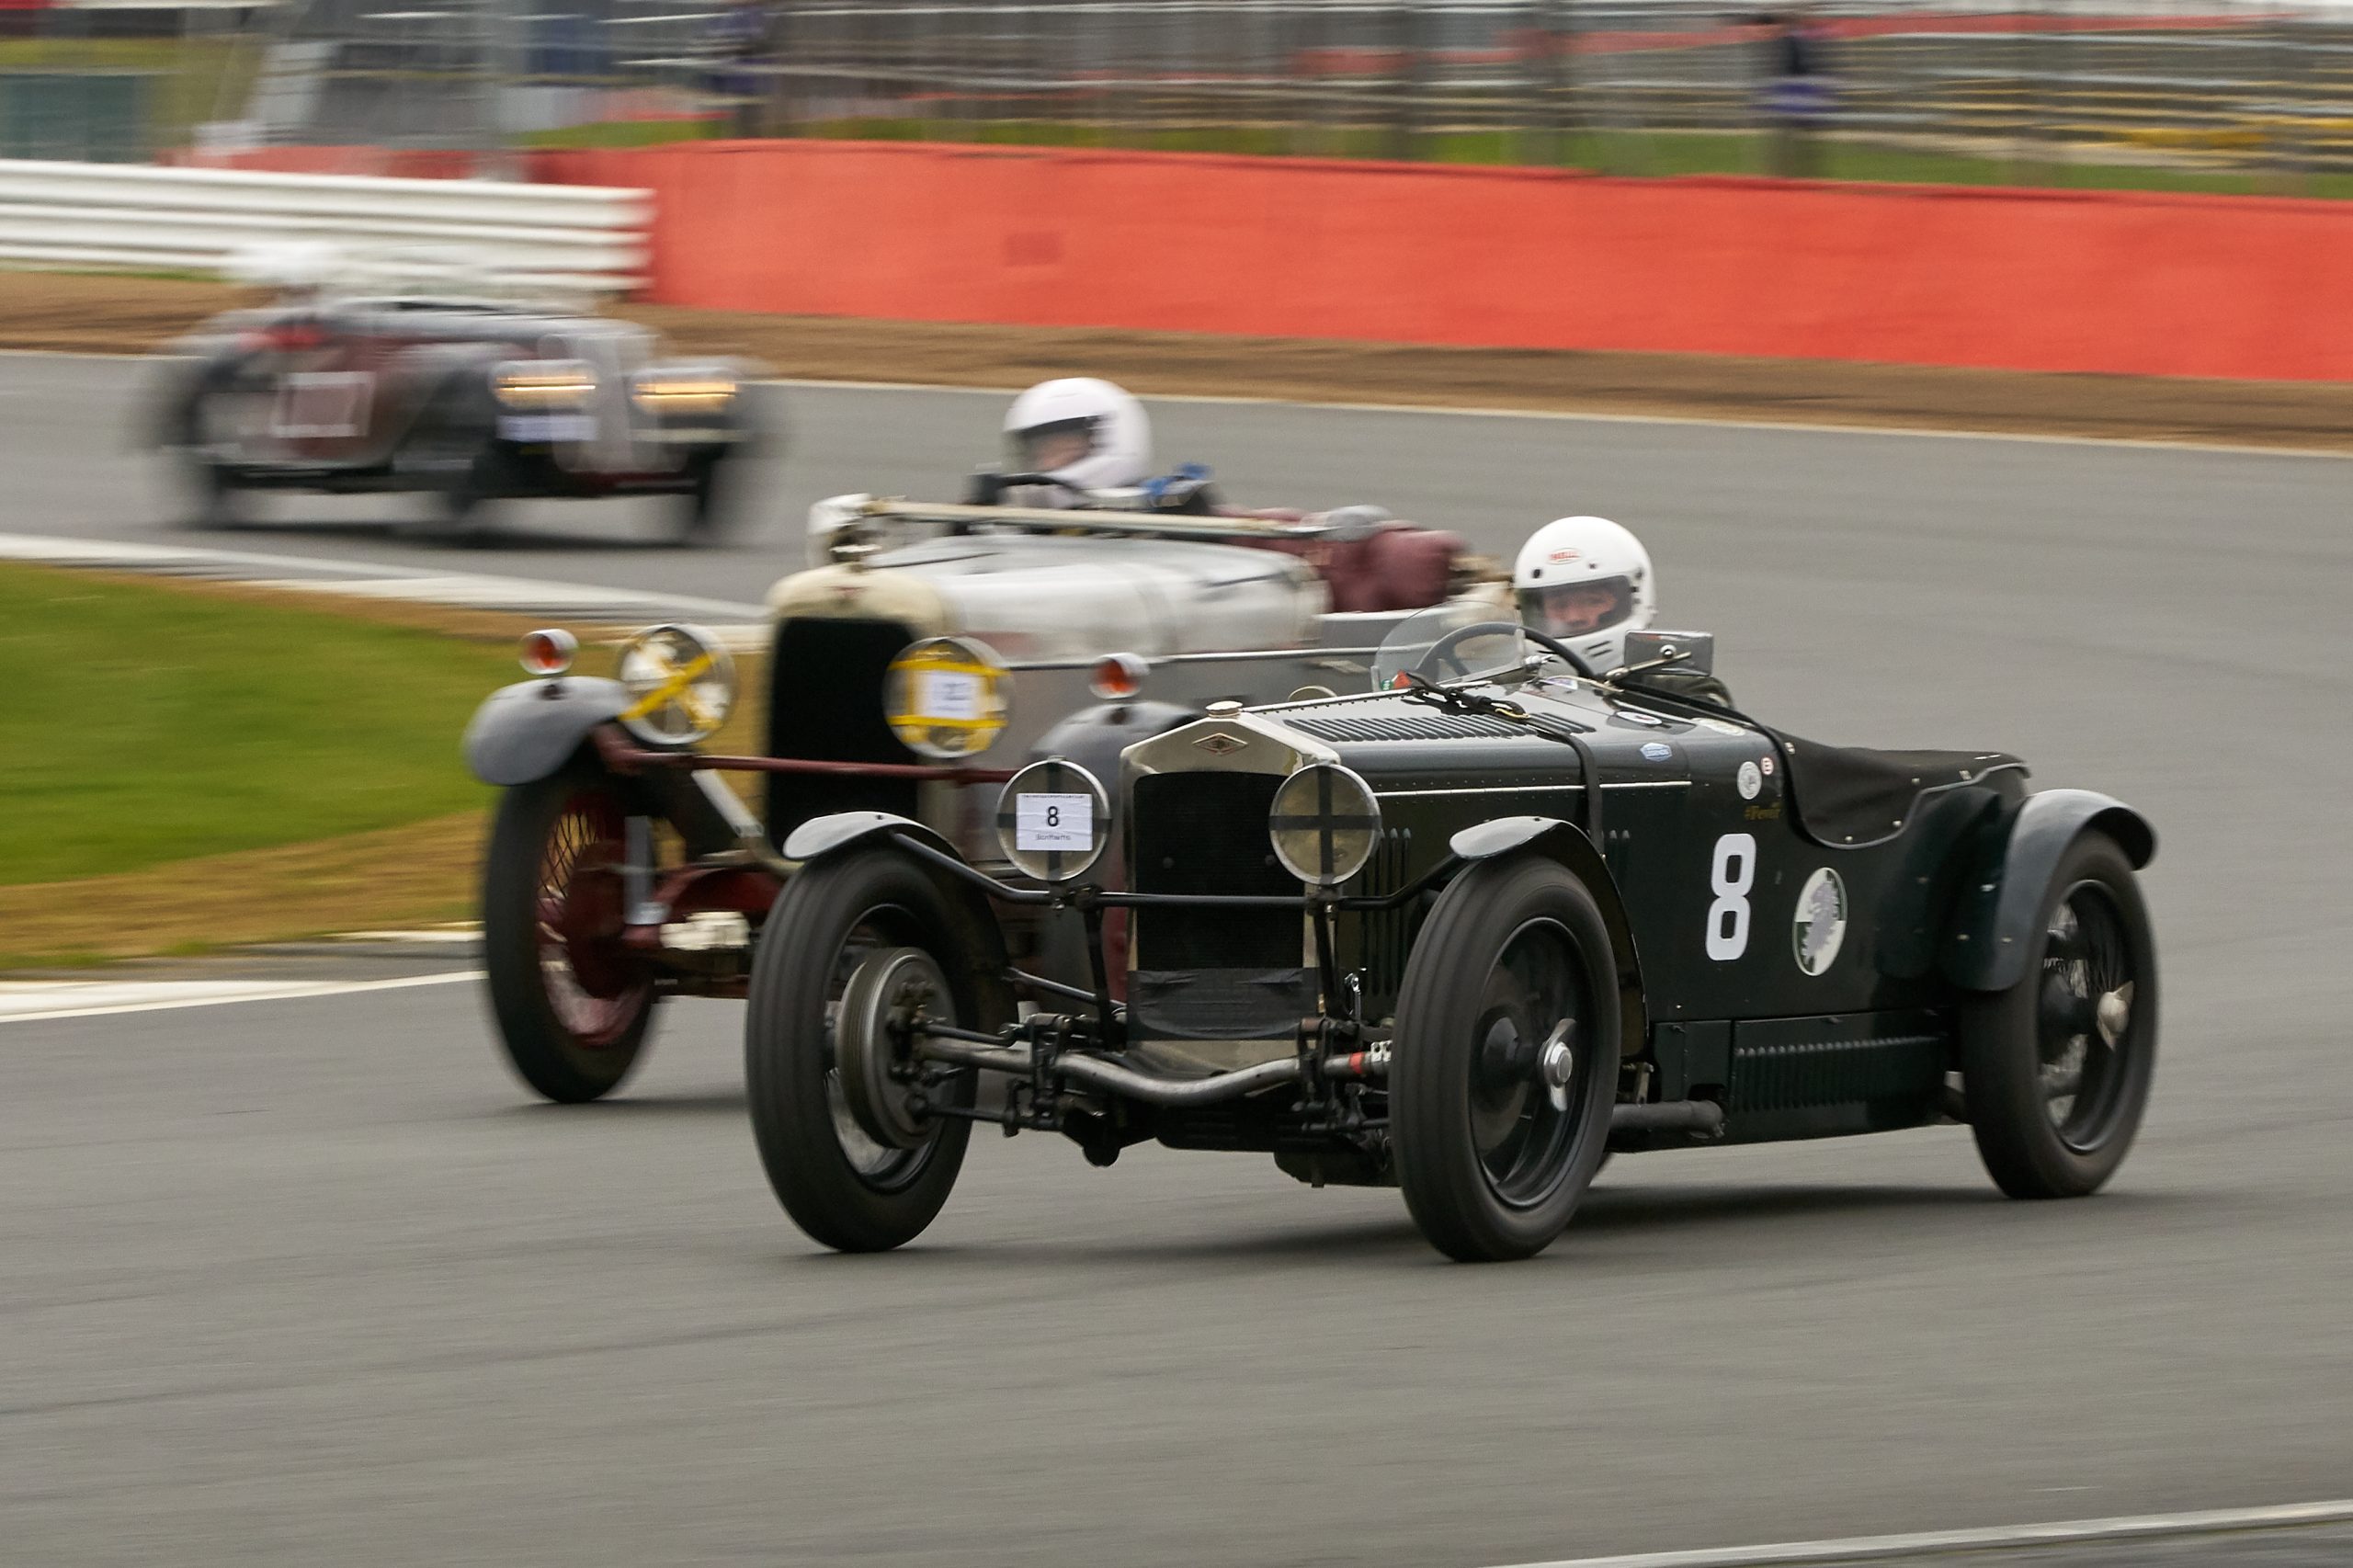 Vintage racing at the VSCC Pomeroy Trophy at Silverstone